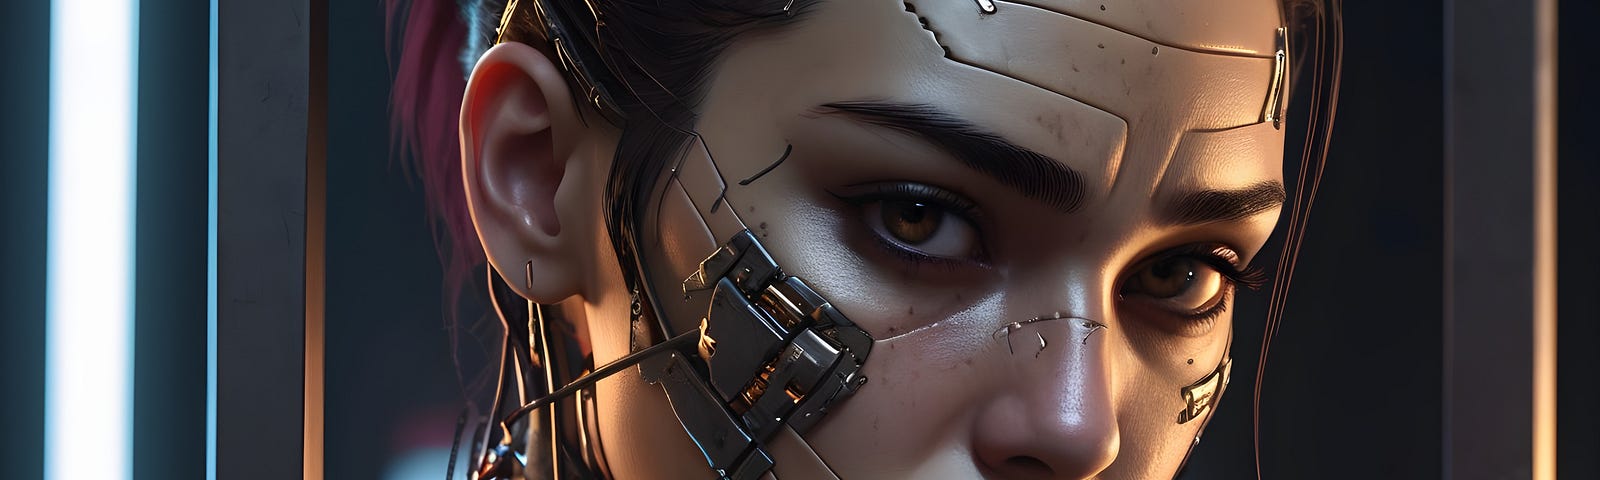 A woman with cyberpunk or cyborg attachments and scars.